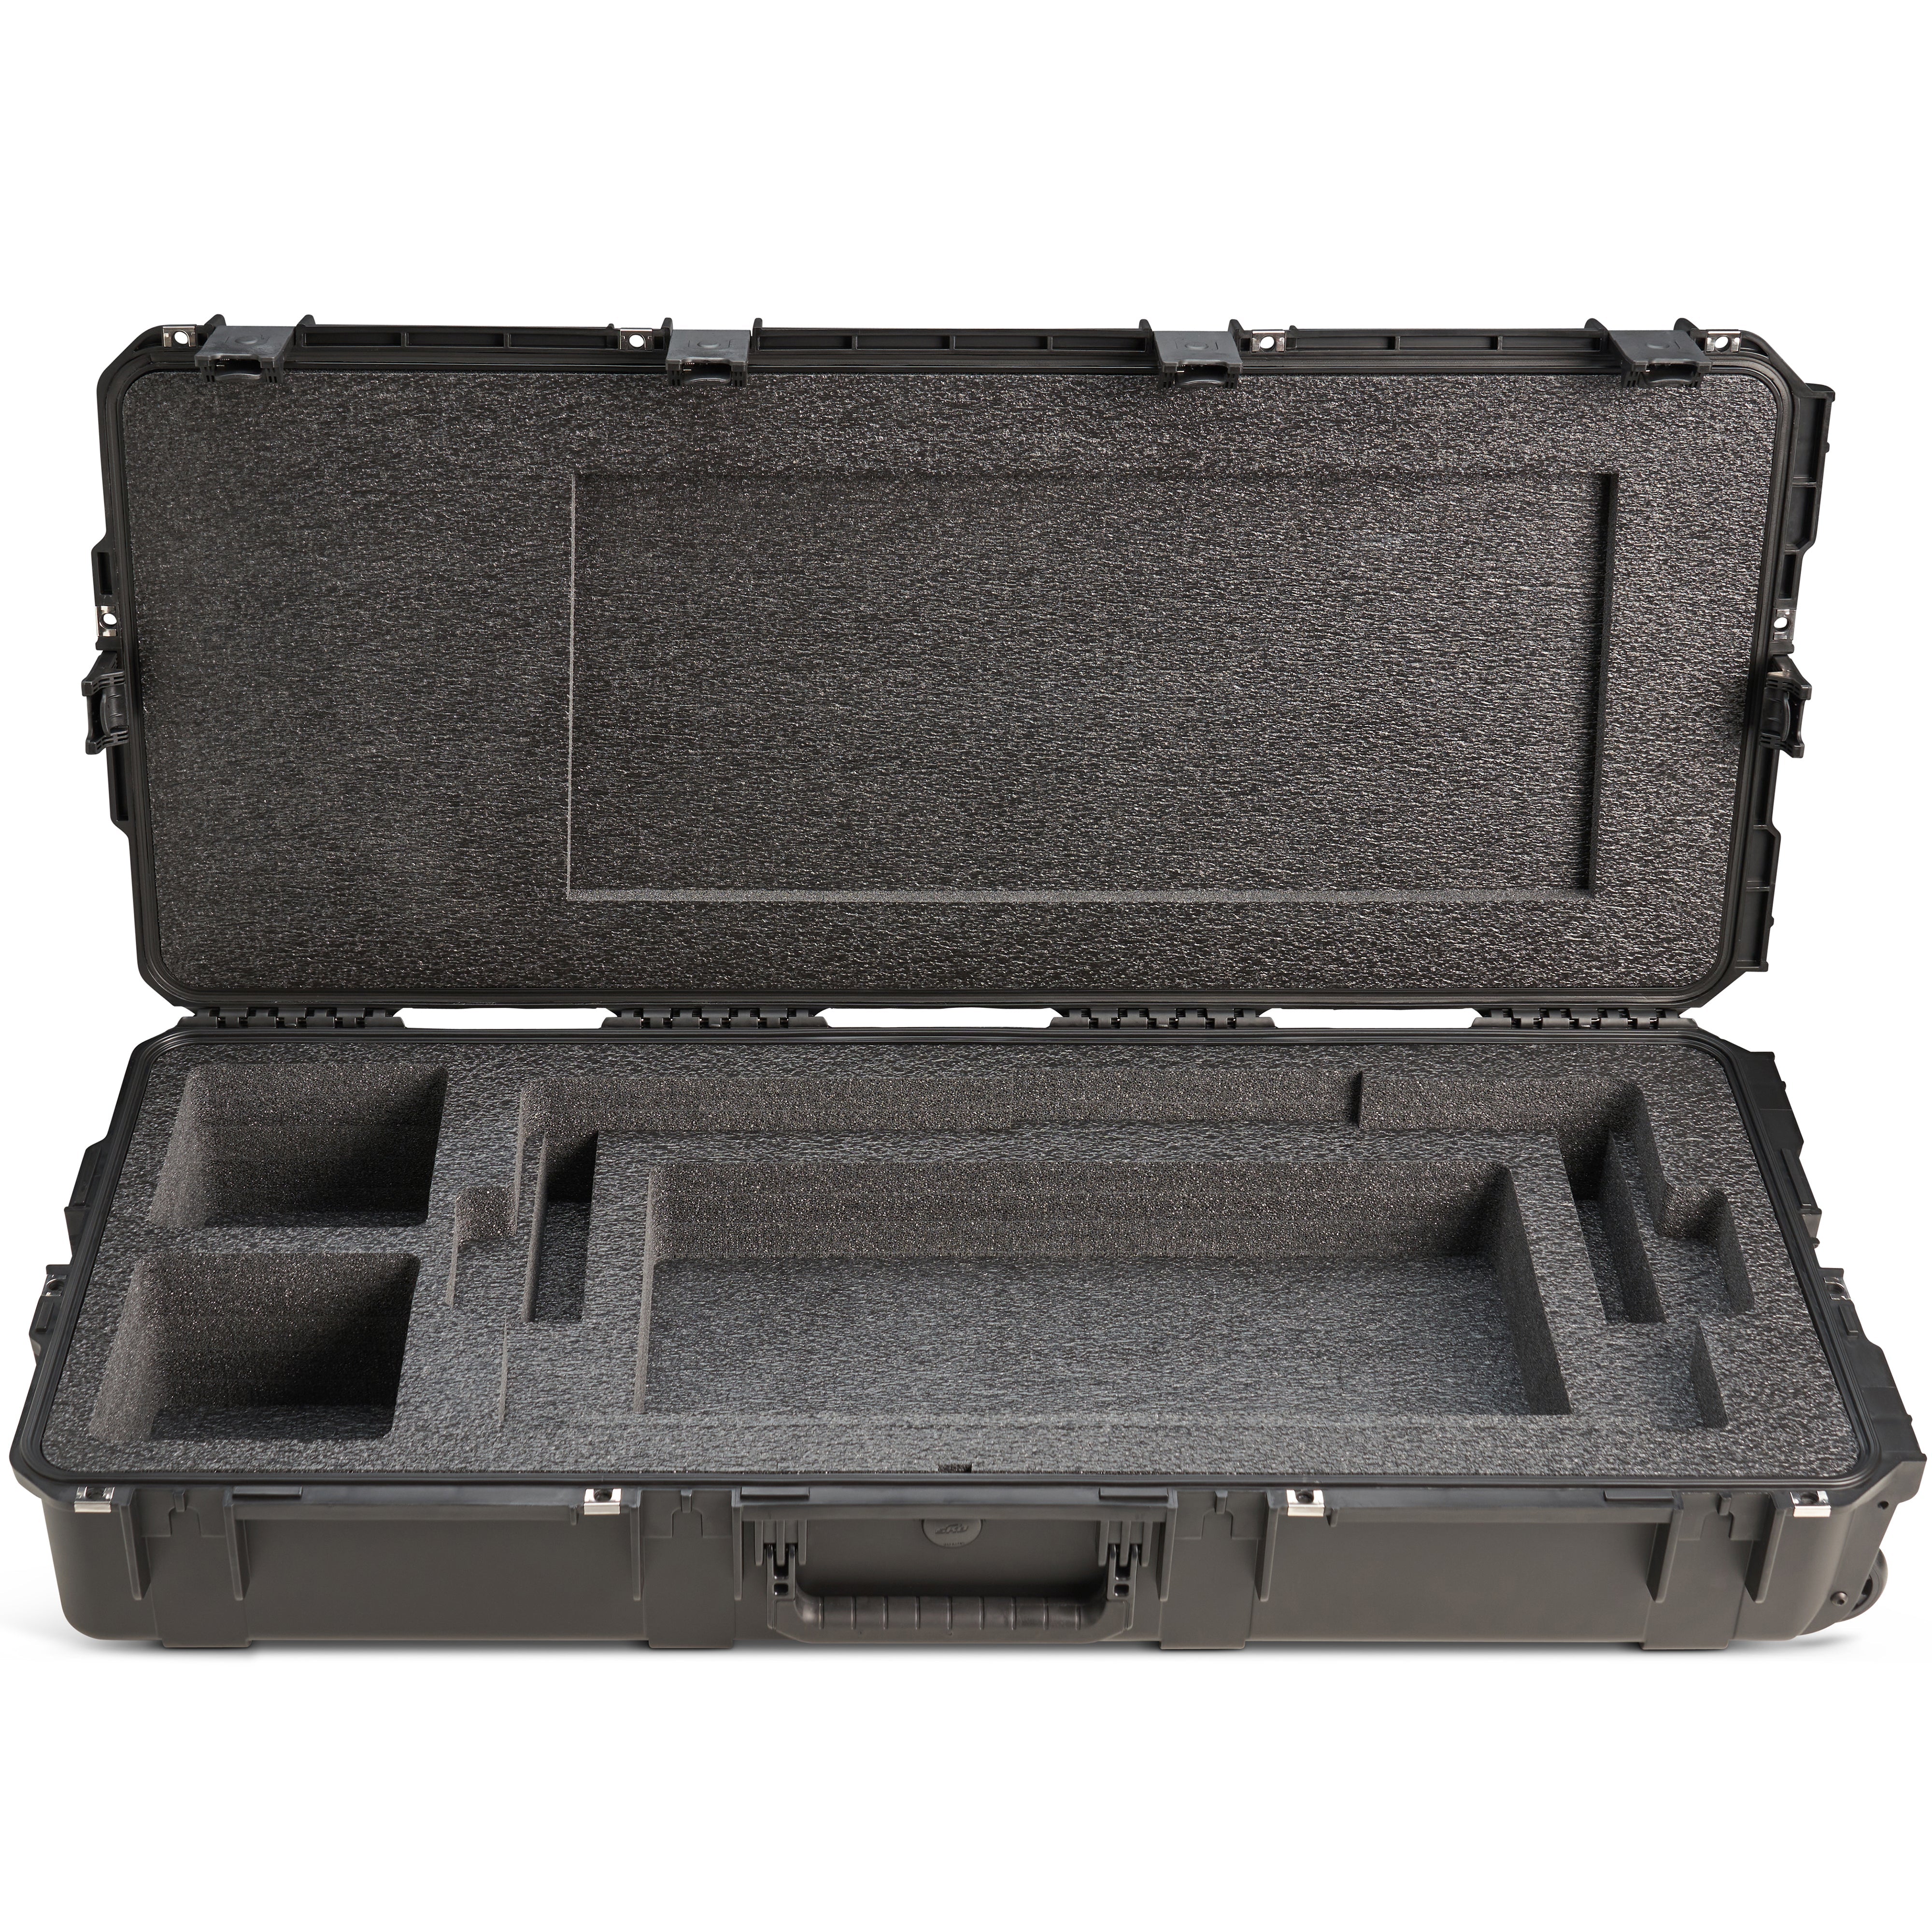 BYFP ipCase for ChamSys QuickQ 30 Lighting Controller